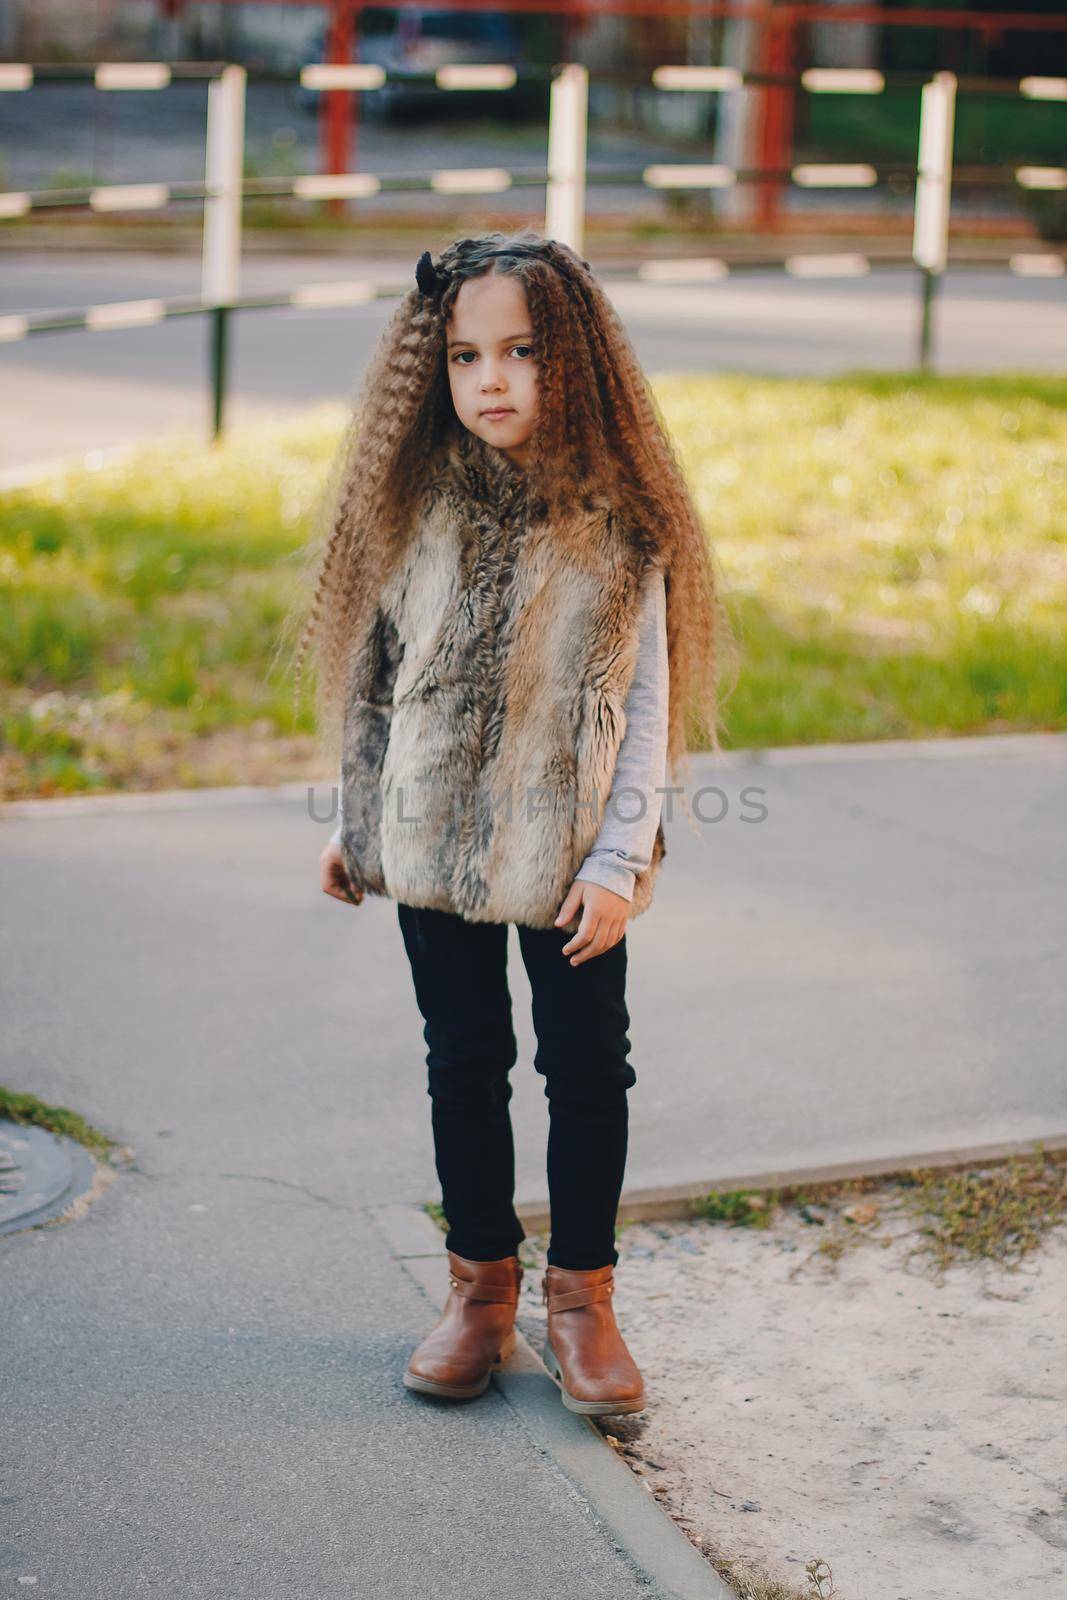 Stylish baby girl 4-5 year old wearing boots, fur coat, moving and playing. Autumn fall season.